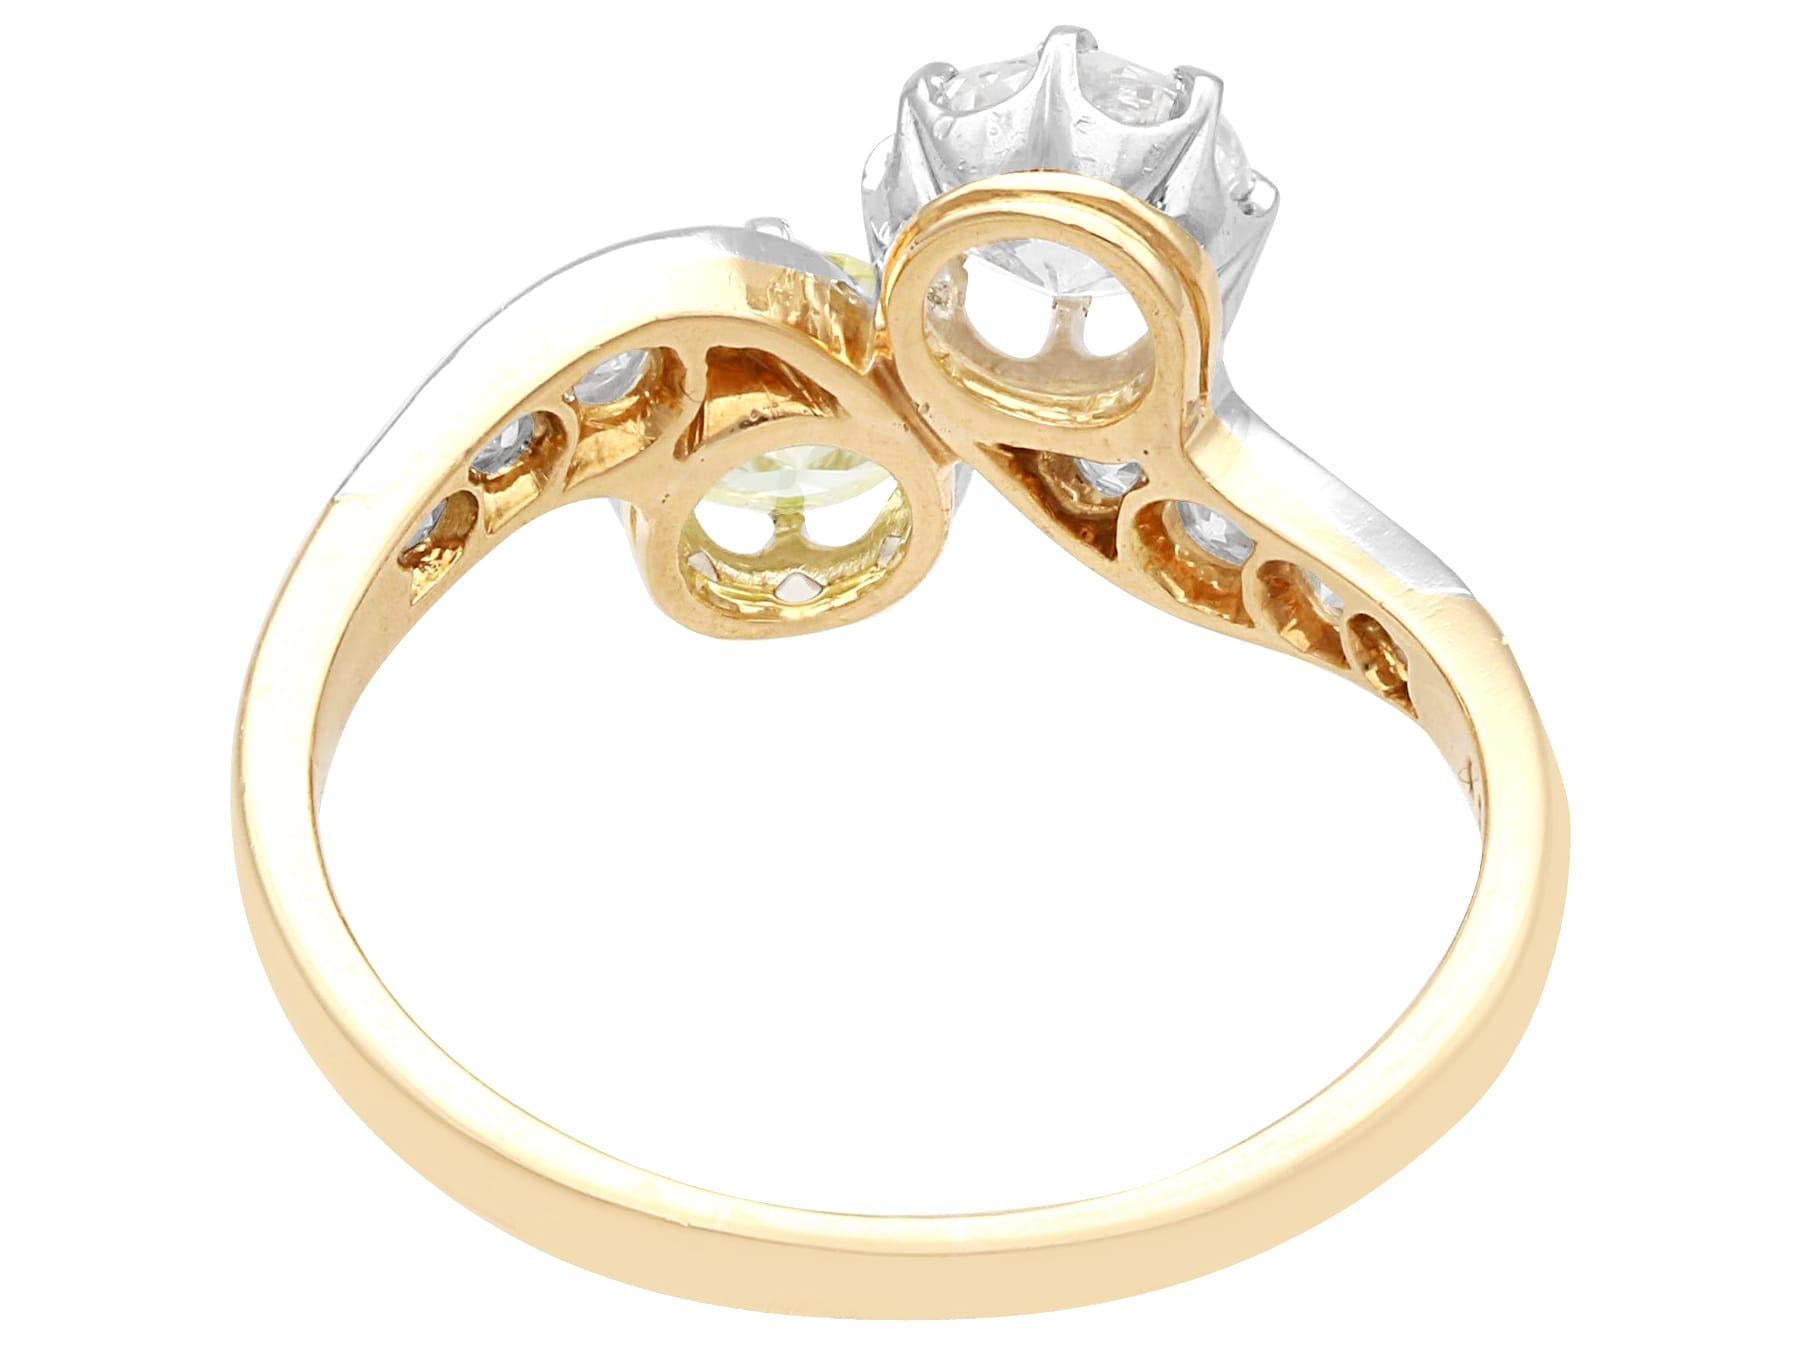 0.75 Carat Yellow Diamond Twist Ring in 18k Yellow Gold In Excellent Condition For Sale In Jesmond, Newcastle Upon Tyne